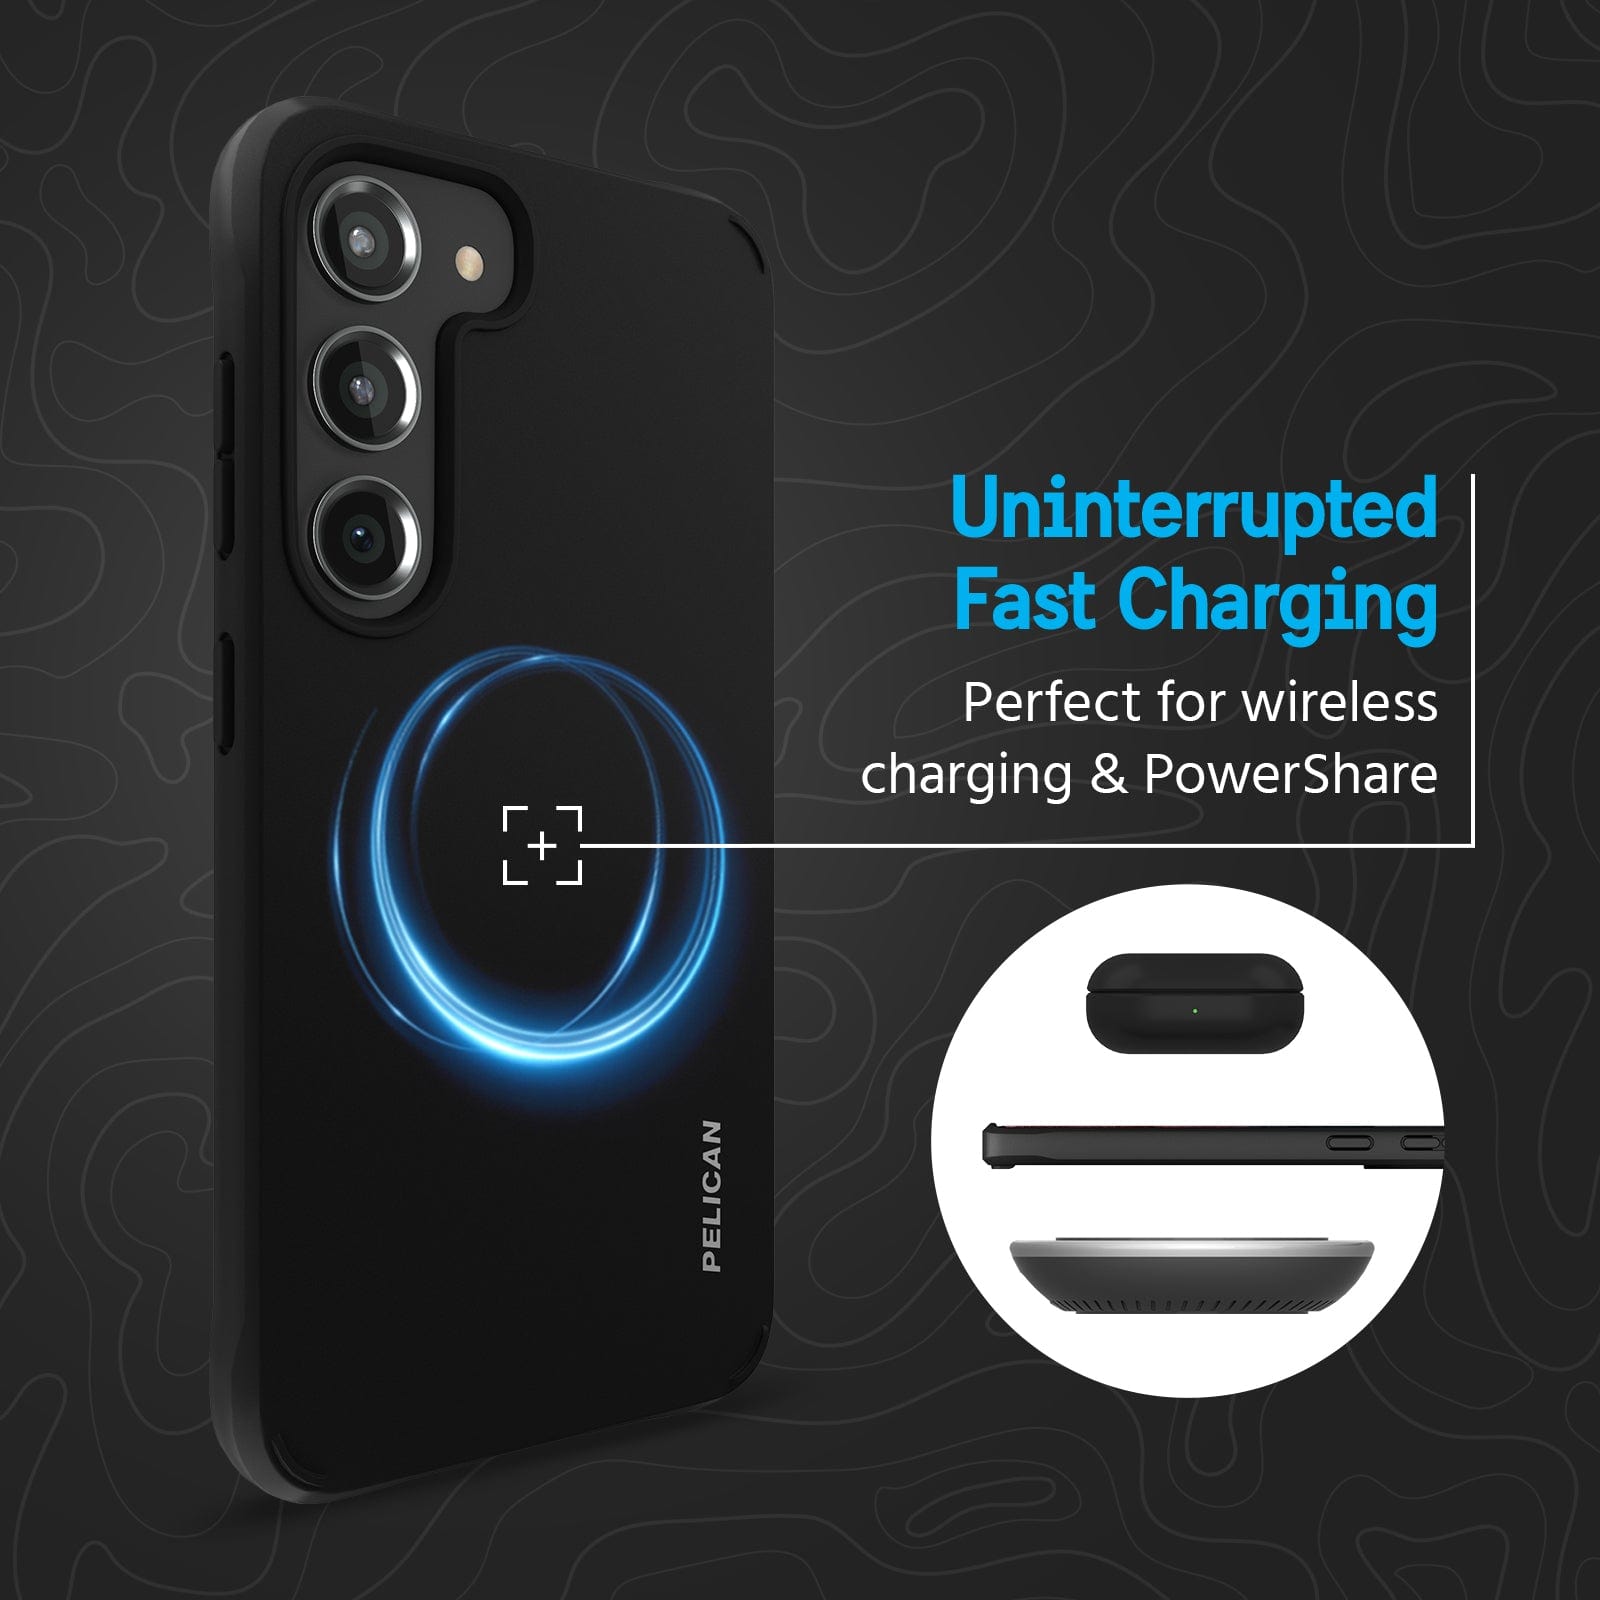 UNINTERRUPTED FAST CHARGING. PERFECT FOR WIRELESS CHARGING & POWERSHARE.